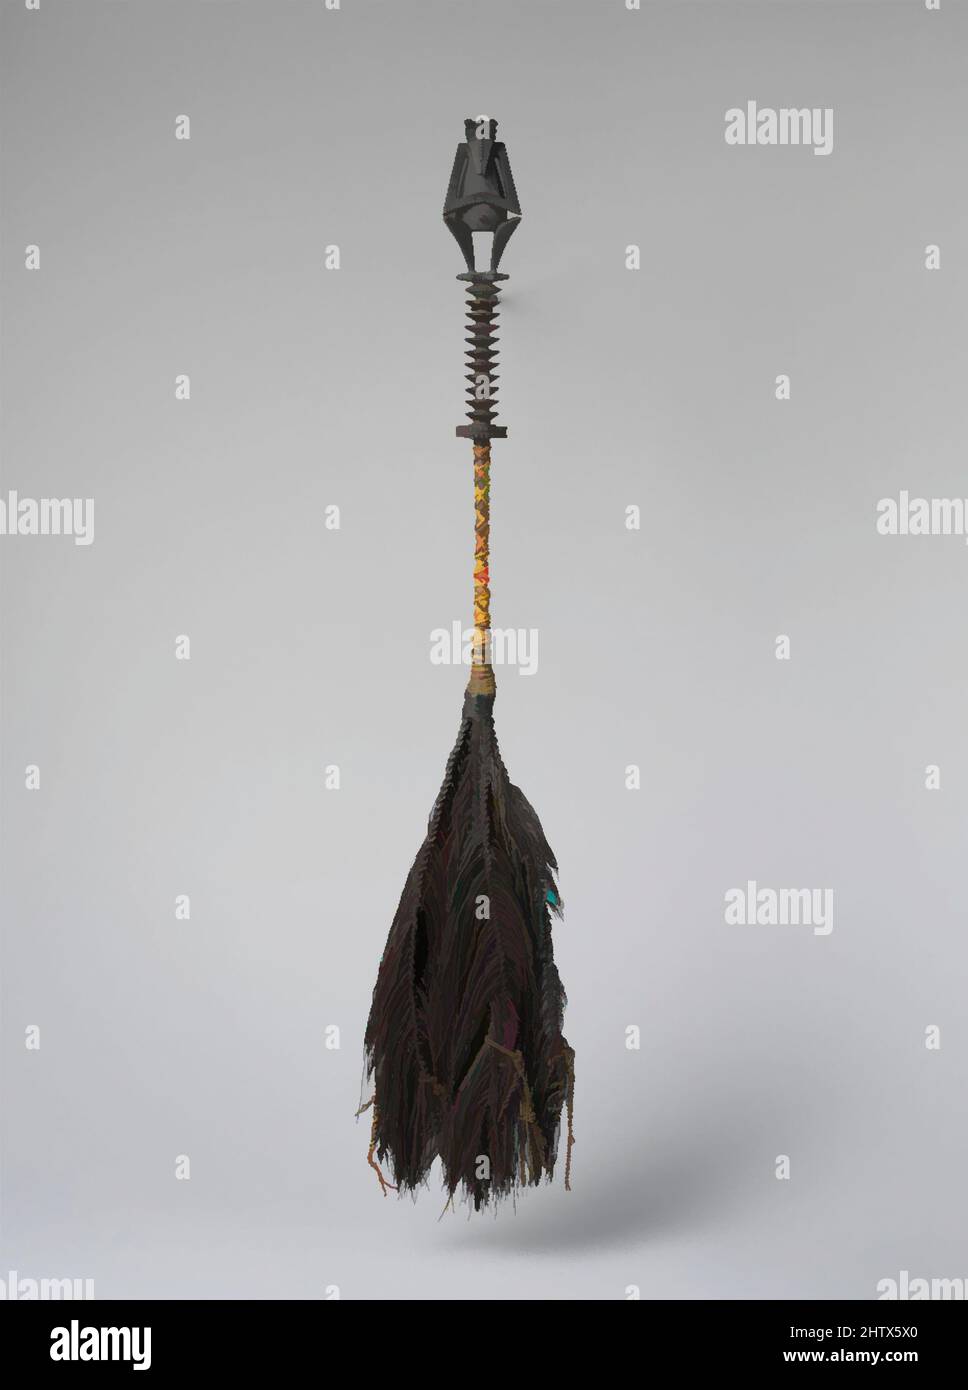 https://c8.alamy.com/comp/2HTX5X0/art-inspired-by-fly-whisk-tahiri-early-to-mid-19th-century-french-polynesia-austral-islands-austral-islanders-wood-fiber-human-hair-w-5-18-x-l-32-in-13-x-813-cm-wood-implements-artists-of-the-austral-islands-created-delicate-fly-whisks-with-handles-adorned-with-classic-works-modernized-by-artotop-with-a-splash-of-modernity-shapes-color-and-value-eye-catching-visual-impact-on-art-emotions-through-freedom-of-artworks-in-a-contemporary-way-a-timeless-message-pursuing-a-wildly-creative-new-direction-artists-turning-to-the-digital-medium-and-creating-the-artotop-nft-2HTX5X0.jpg